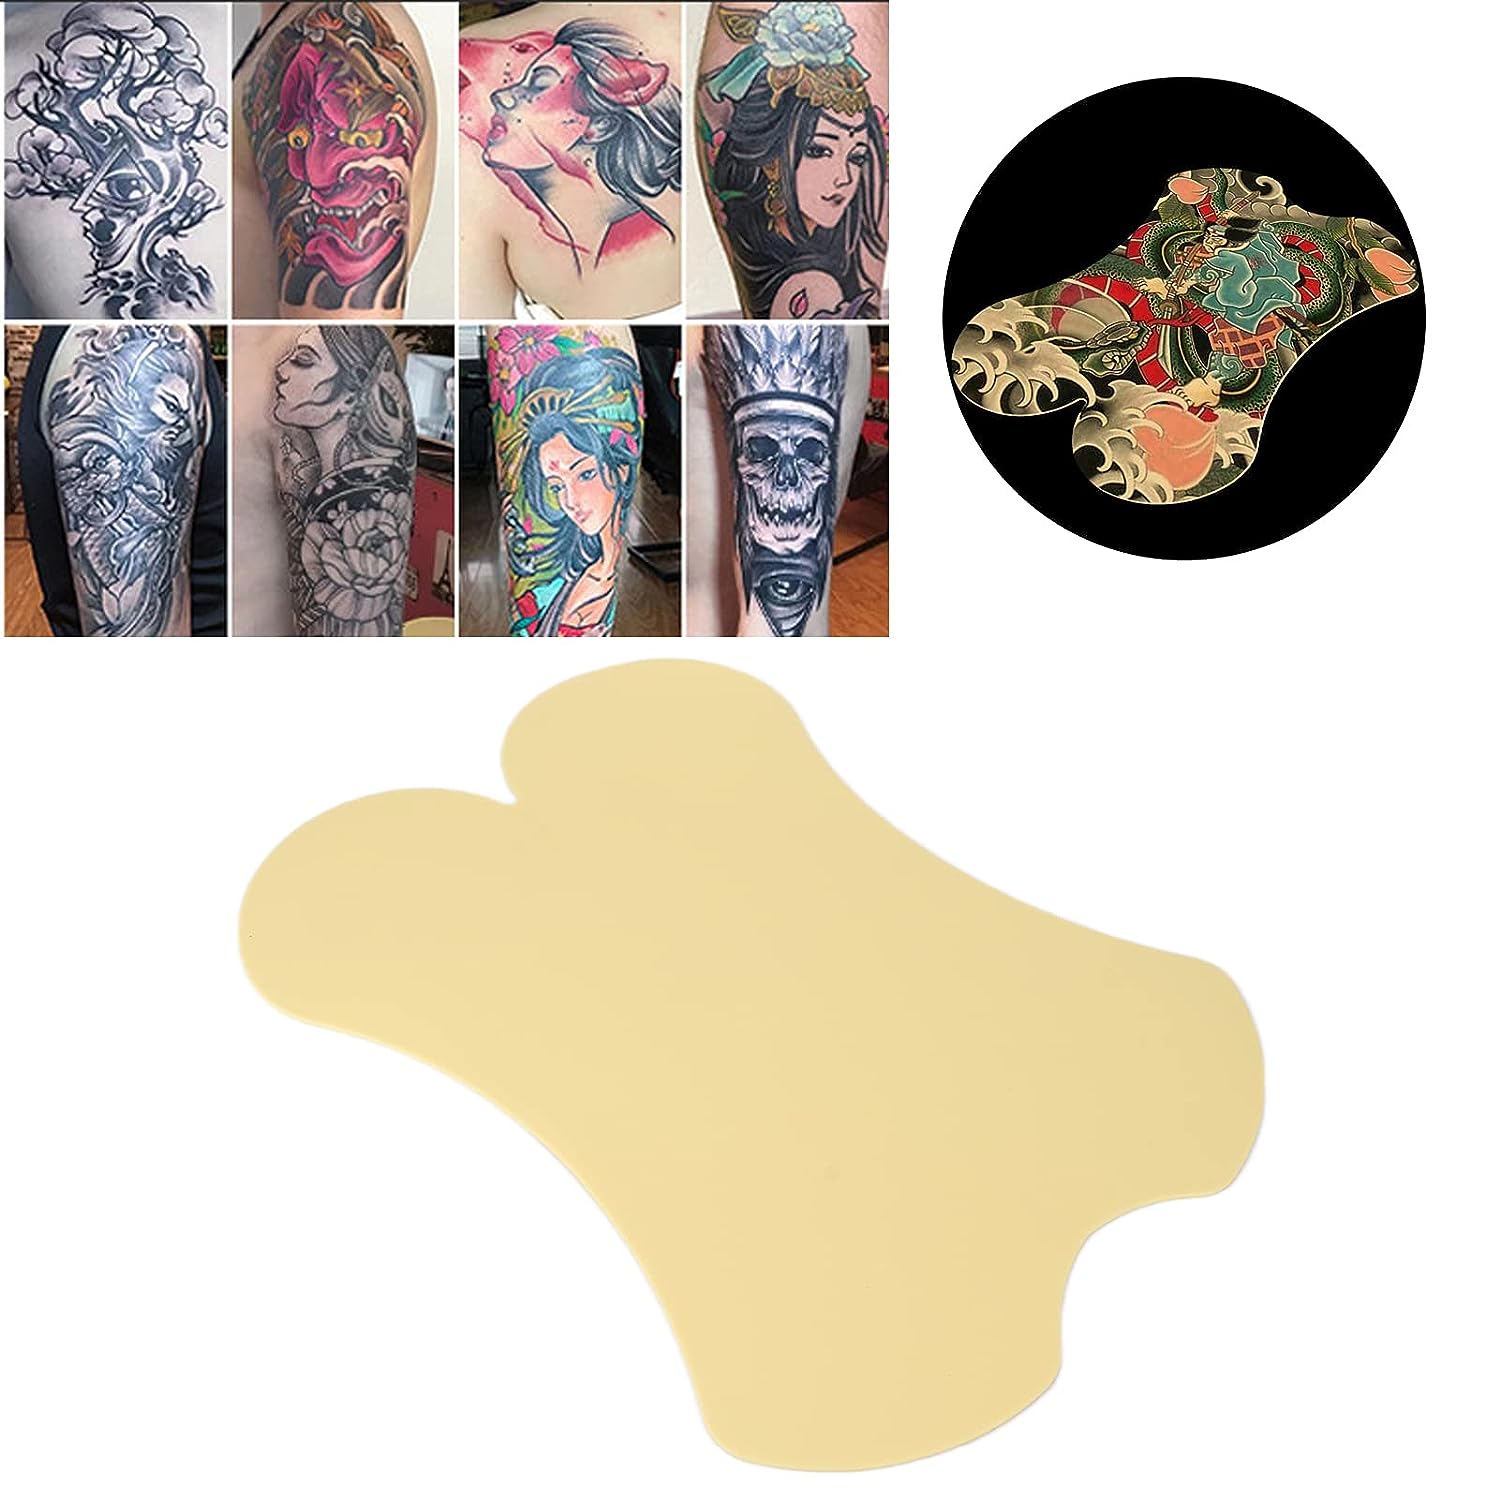 Everything You Never Knew About Synthetic Skin for Tattoos